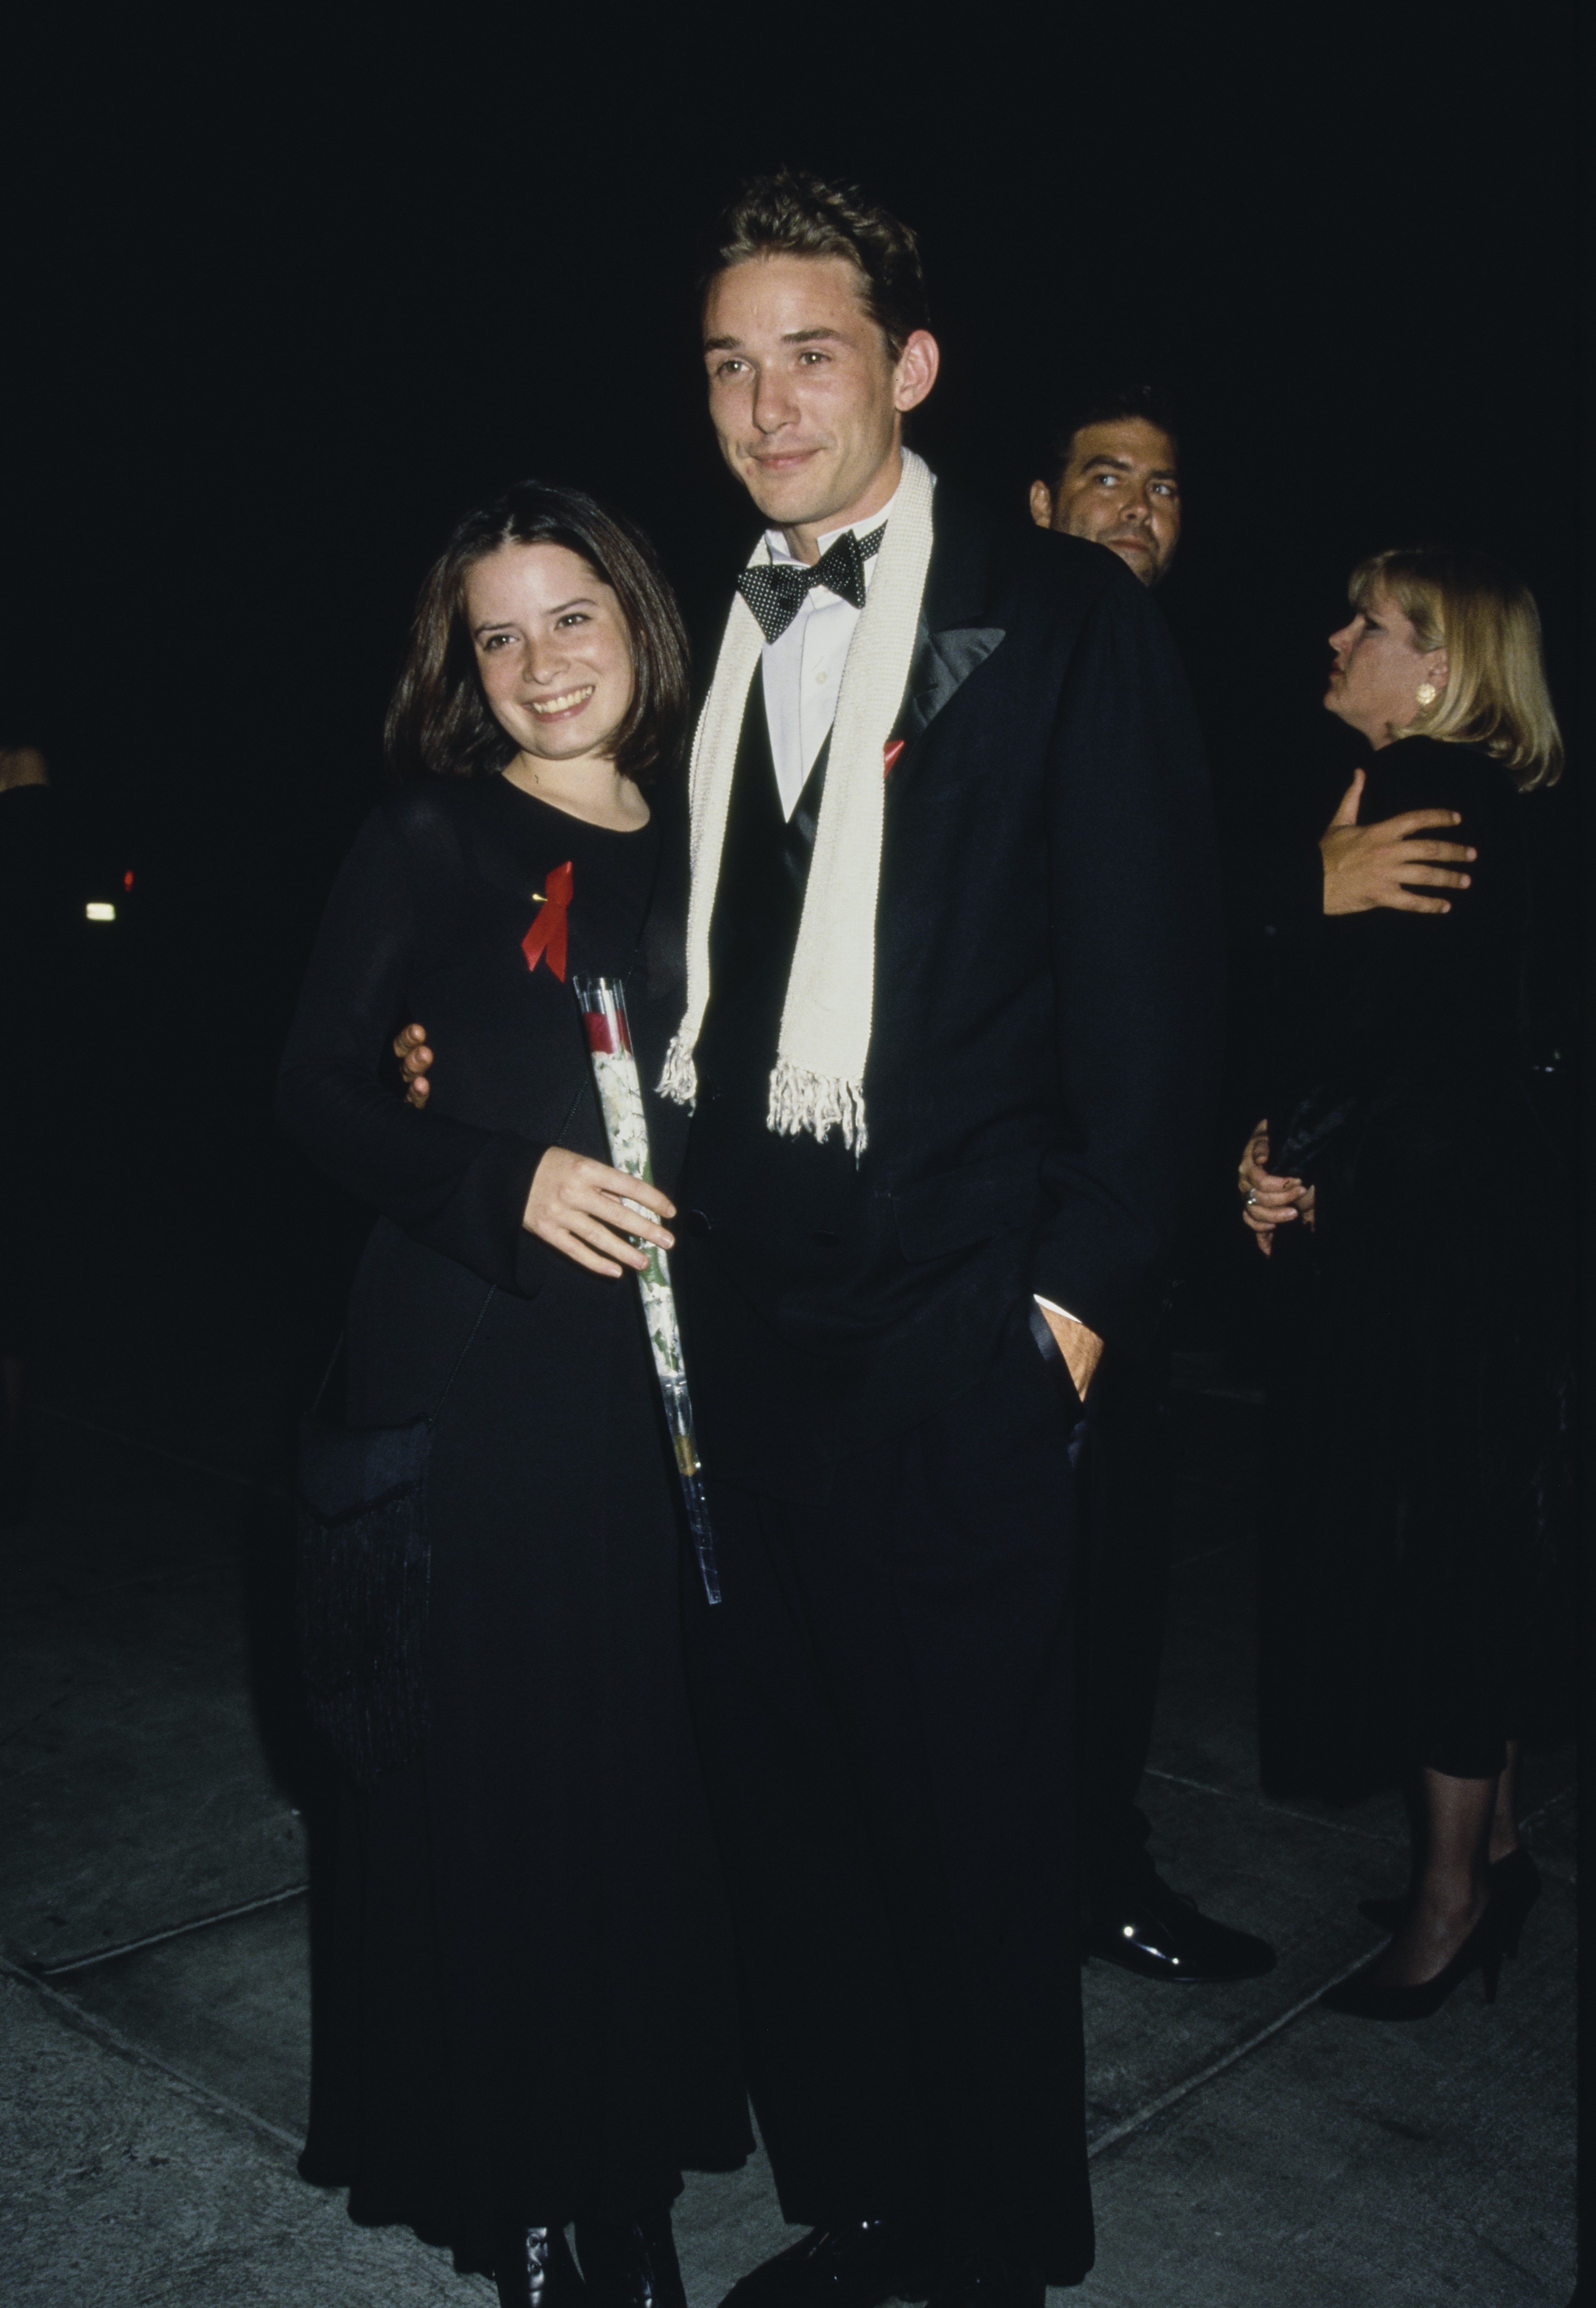 Holly Marie Combs and Bryan Smith attend the 45th Annual Primetime Emmy Awards in Pasadena, California, on September 18, 1993.